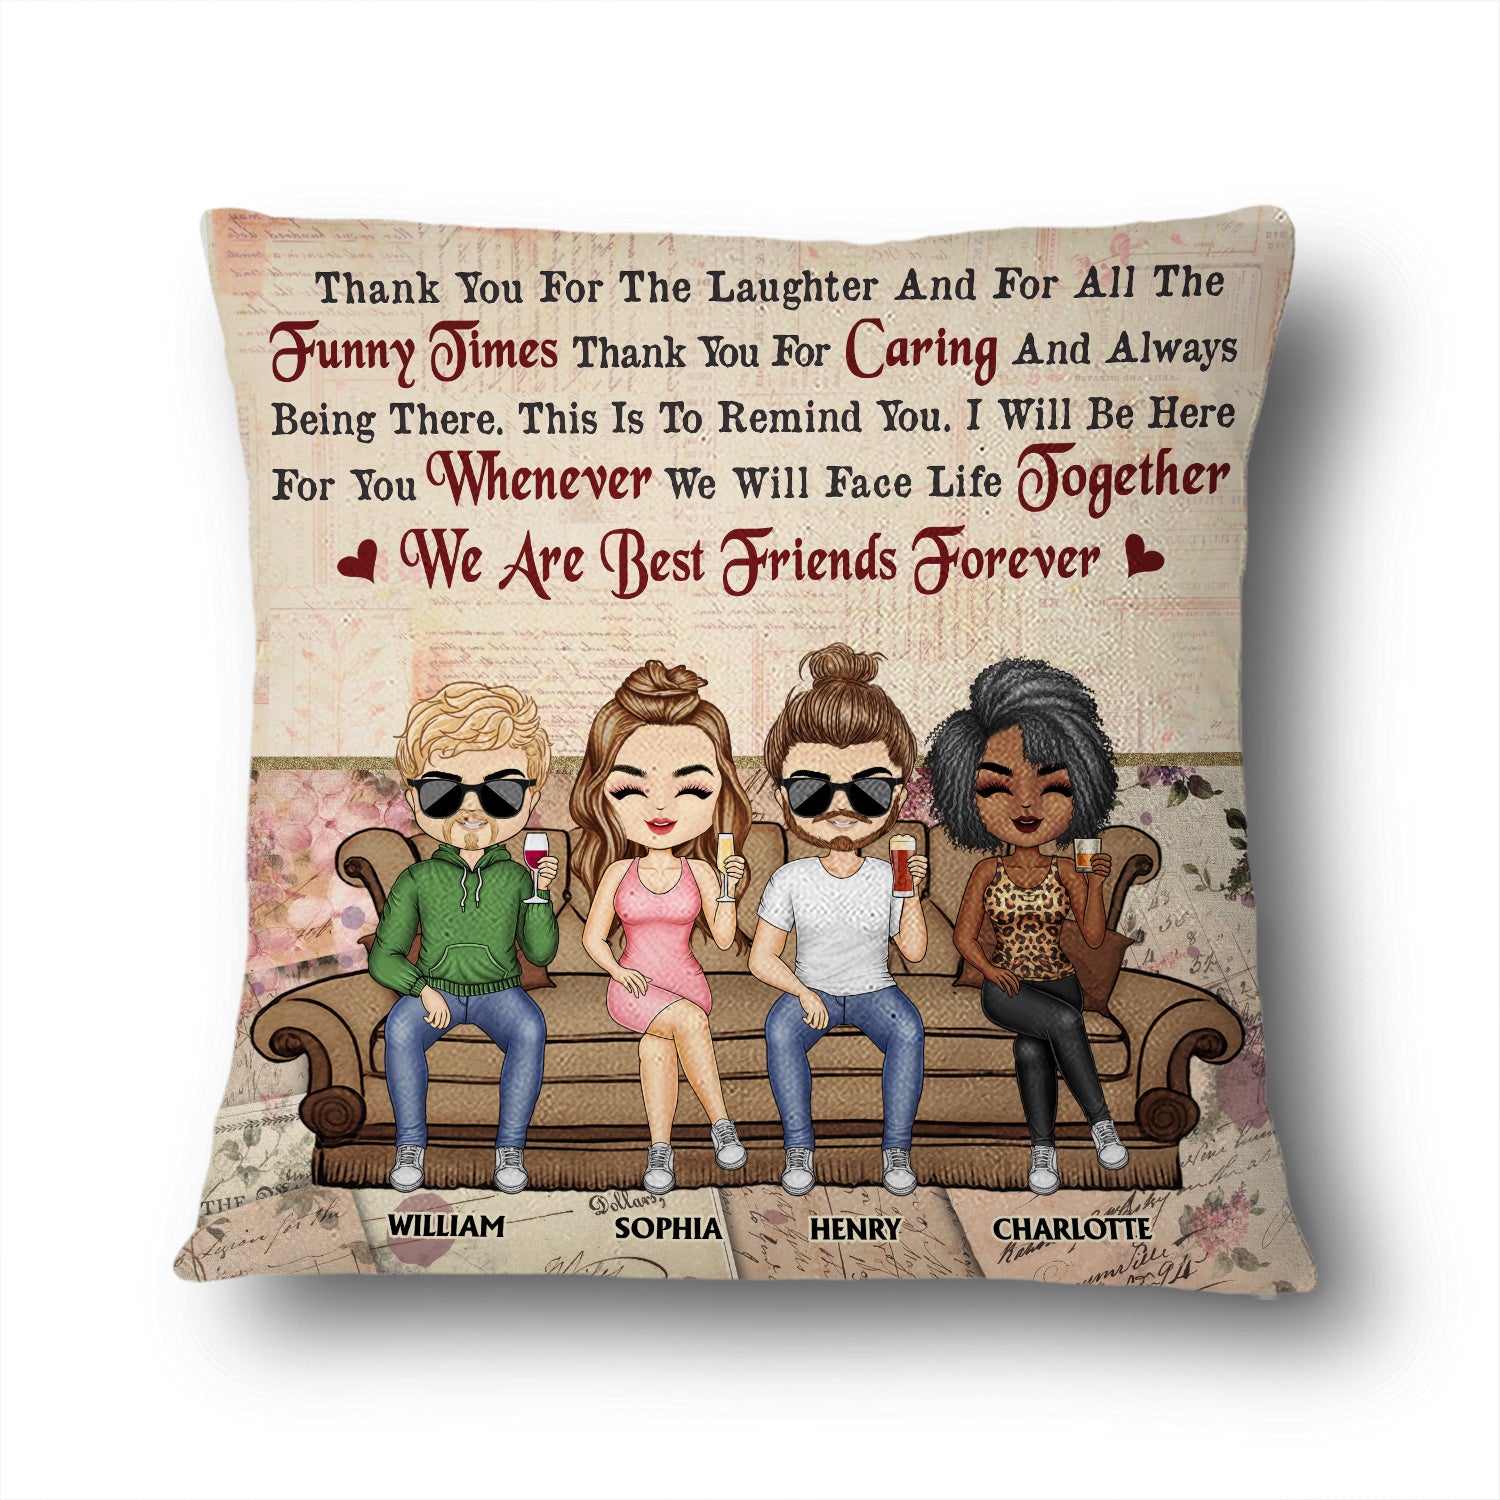 Thank You For The Laughter And For All The Funny Times Best Friends Besties Sisters Brothers Siblings Family - Housewarming Gifts - Personalized Custom Pillow